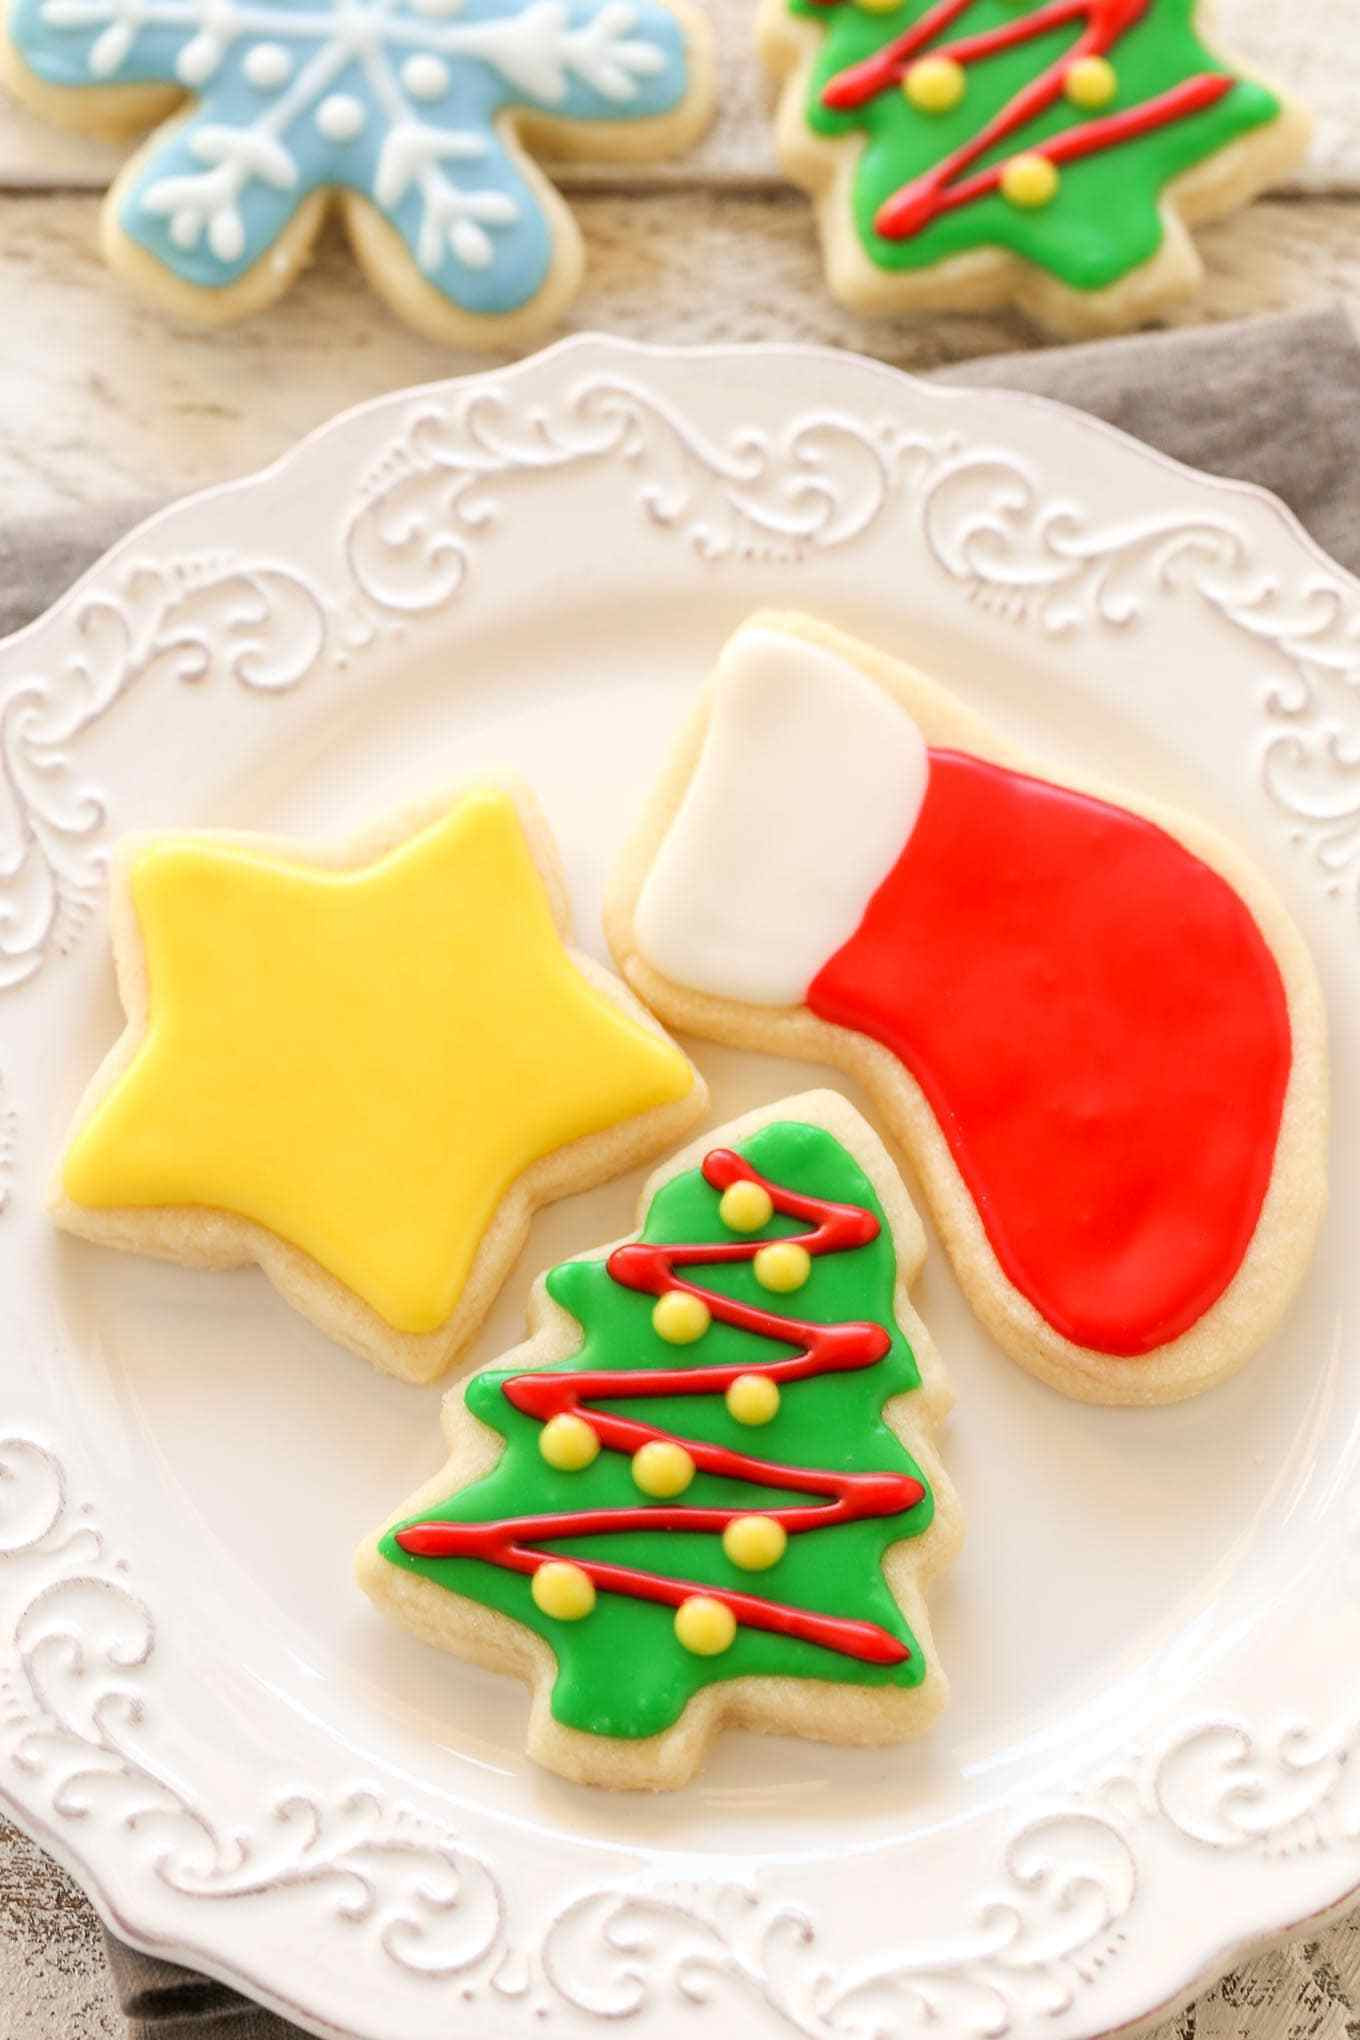 Easy Christmas Cut Out Cookies
 Soft Christmas Cut Out Sugar Cookies Live Well Bake ten